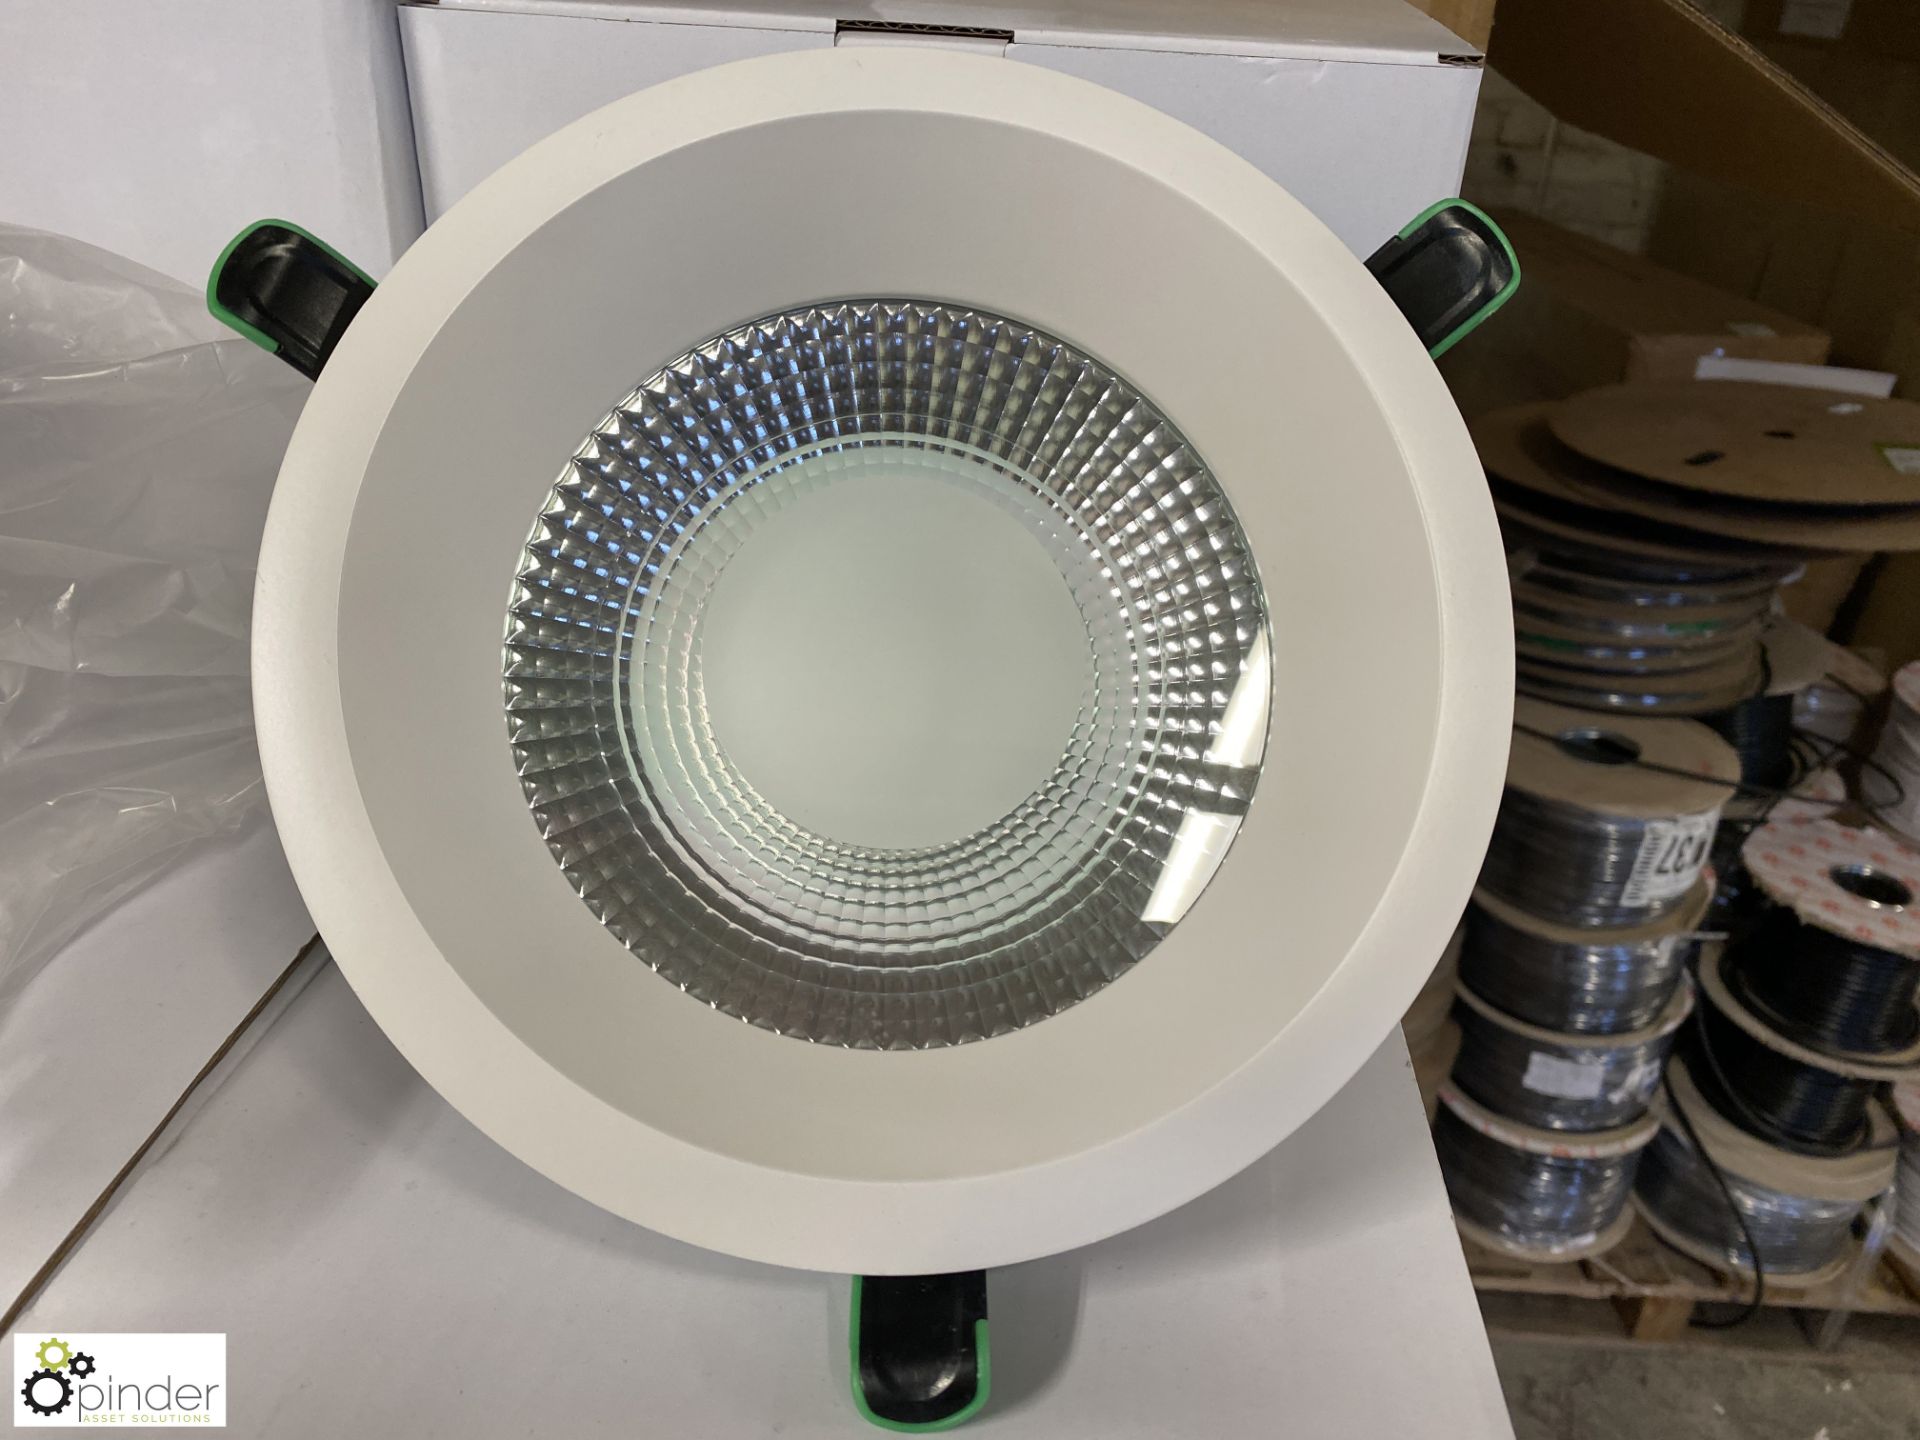 18 Taison LED Downlights OEM-GLE OE with separate drivers